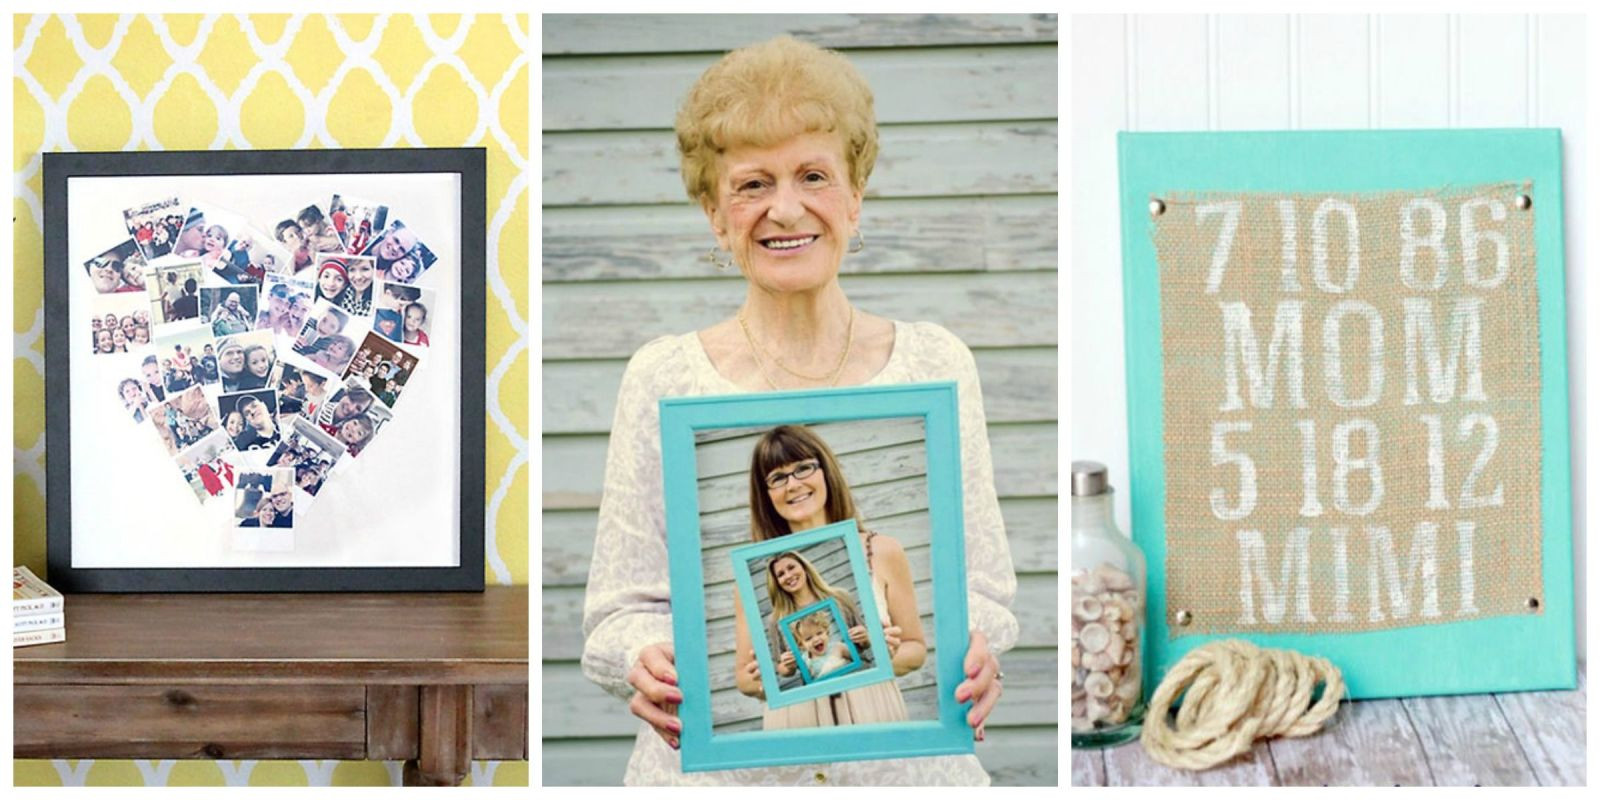 Mothers Day Gift Ideas For Grandma
 15 Best Mother s Day Gifts for Grandma Crafts You Can